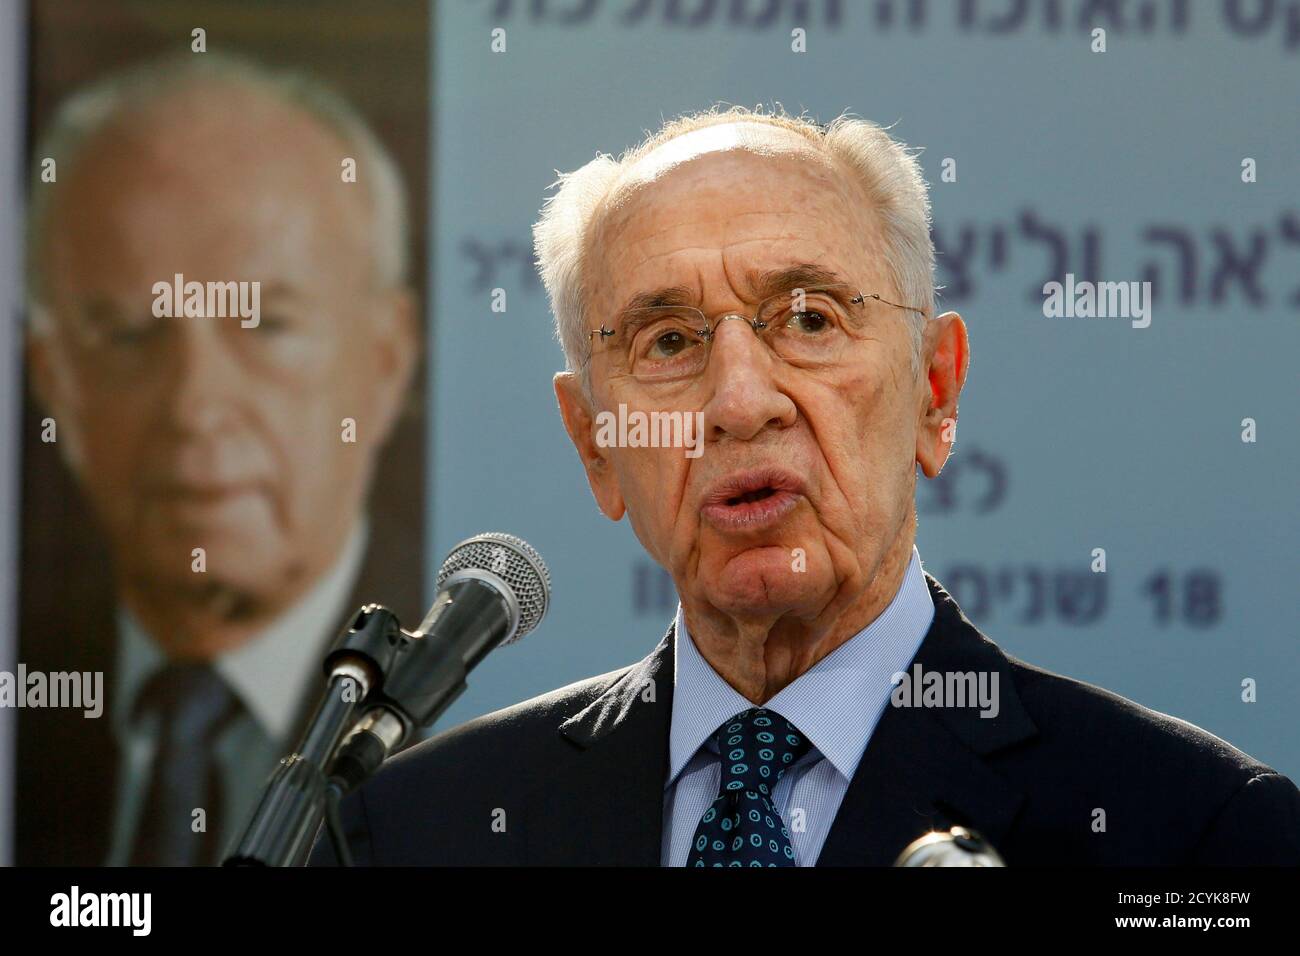 Israeli President Shimon Peres gives a speech during a ceremony for late  Israeli prime minister Yitzhak Rabin at the Mount Herzl cemetery in  Jerusalem October 16, 2013, marking 18 years since Rabin